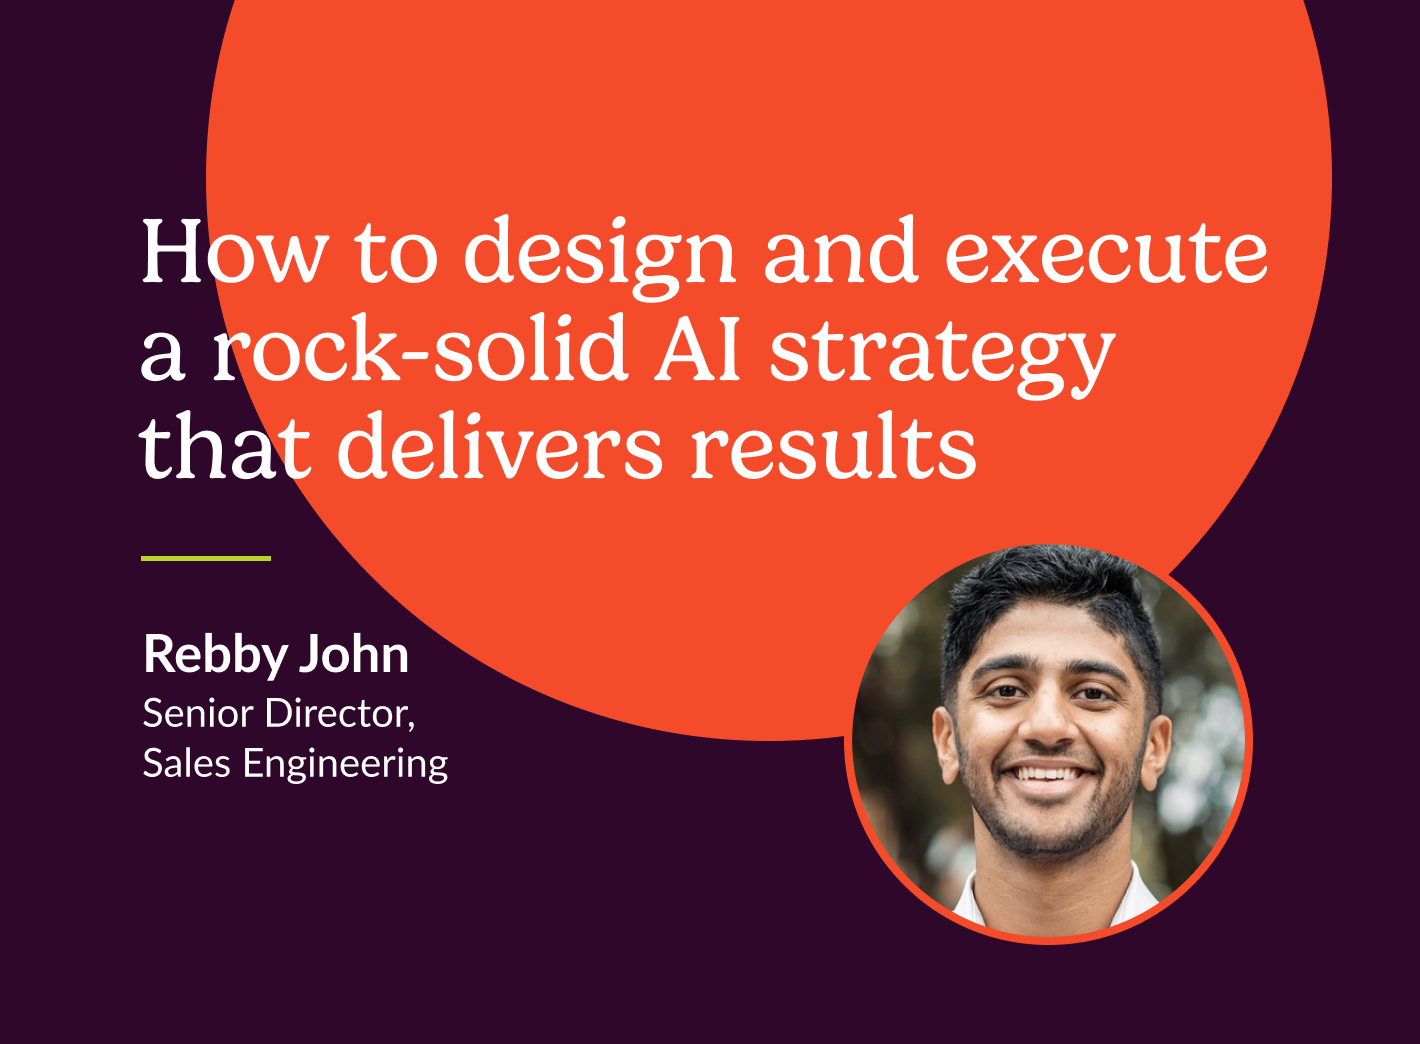 How to design and execute a rock-solid AI strategy that delivers results